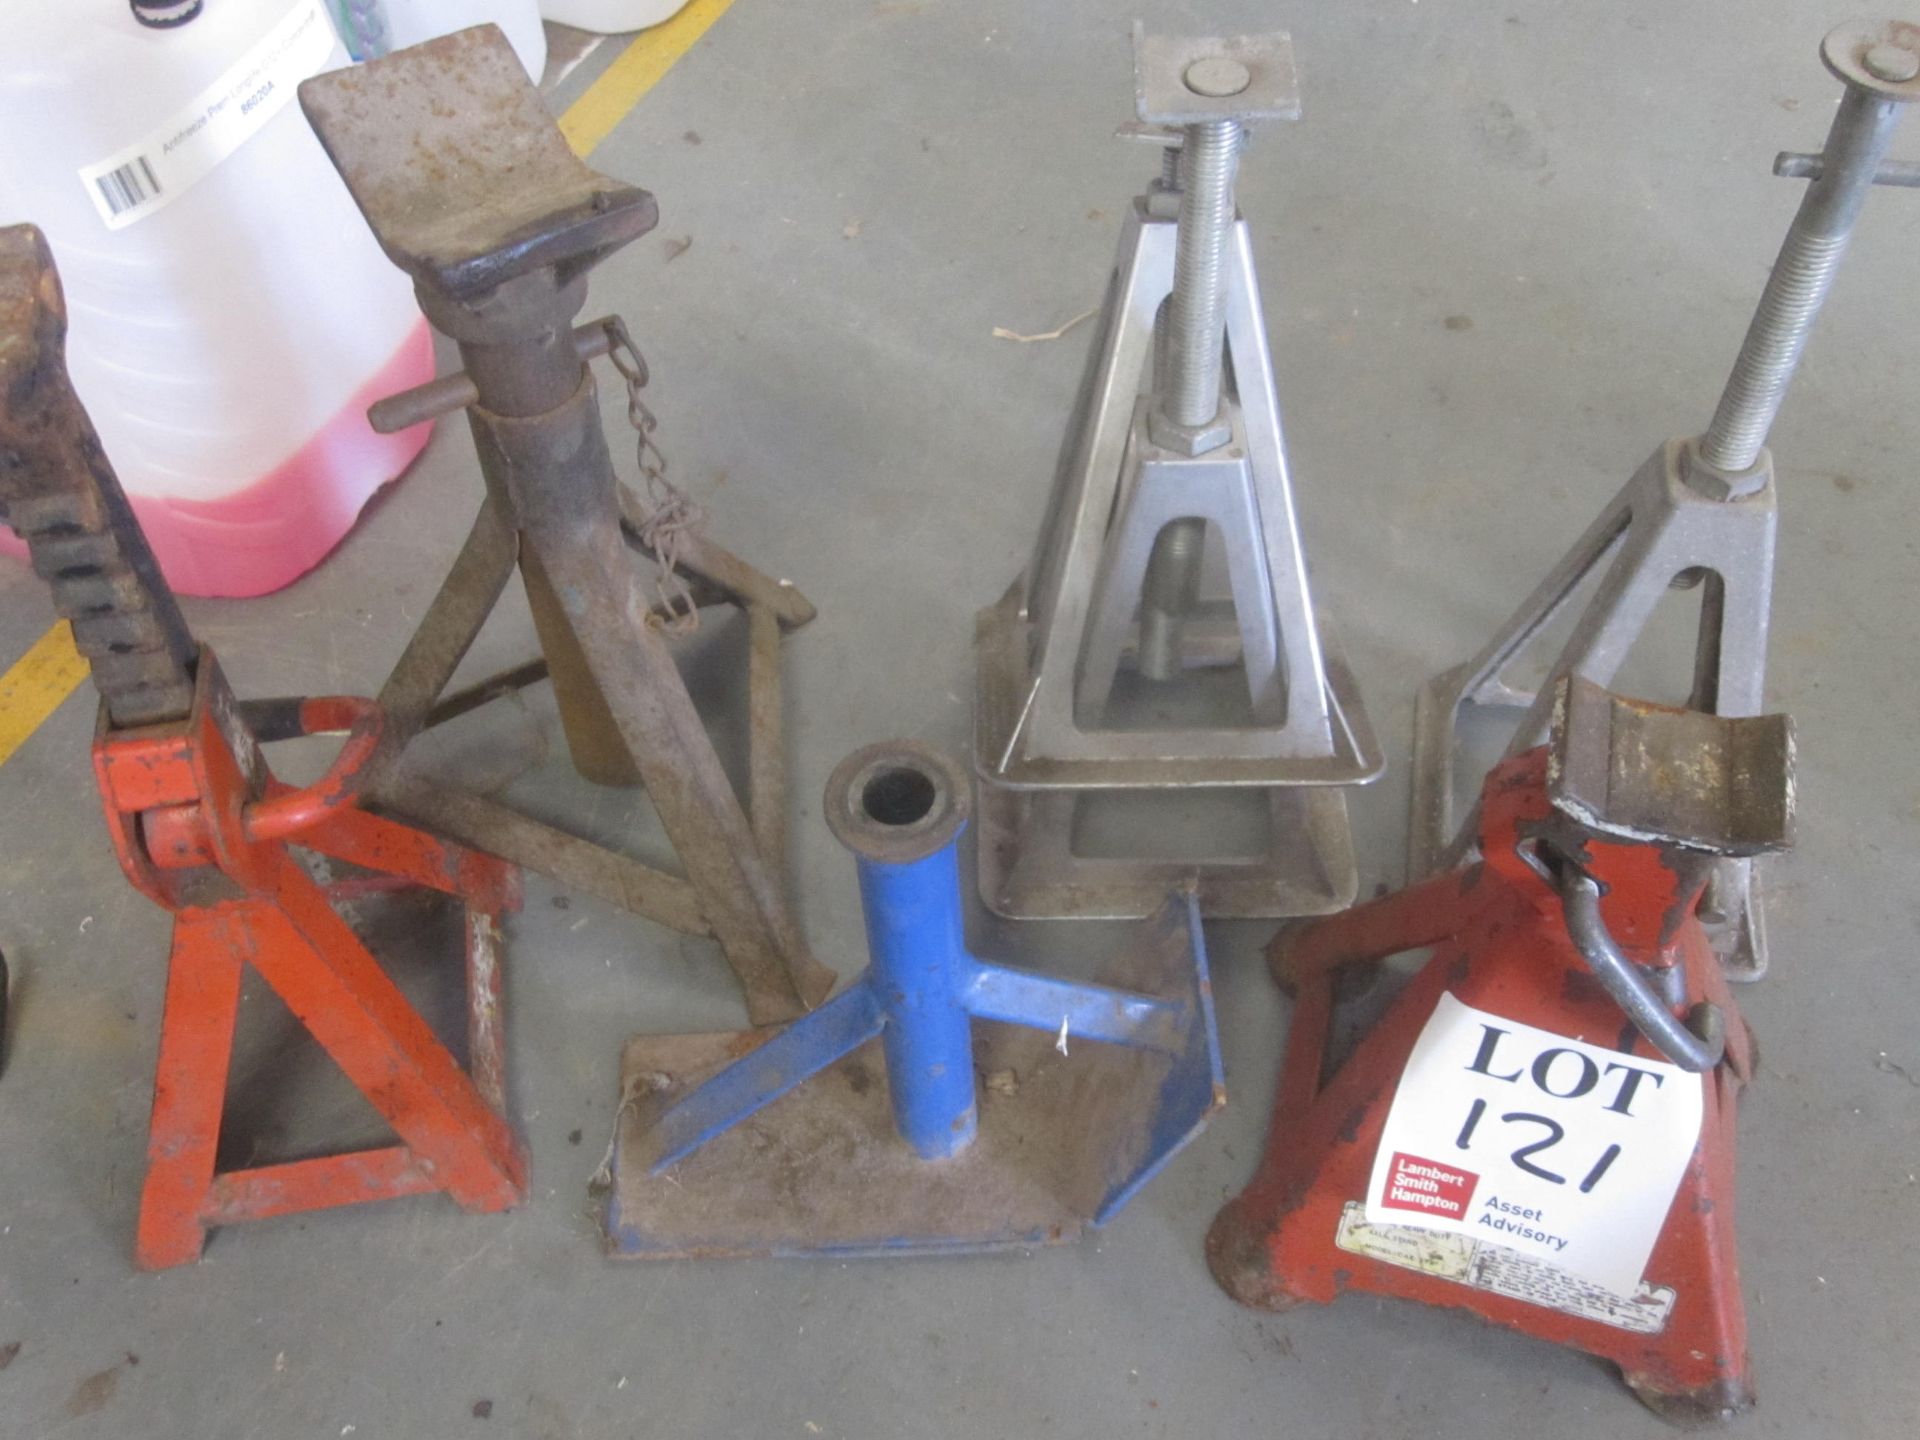 Six assorted axle stands and one additional stand